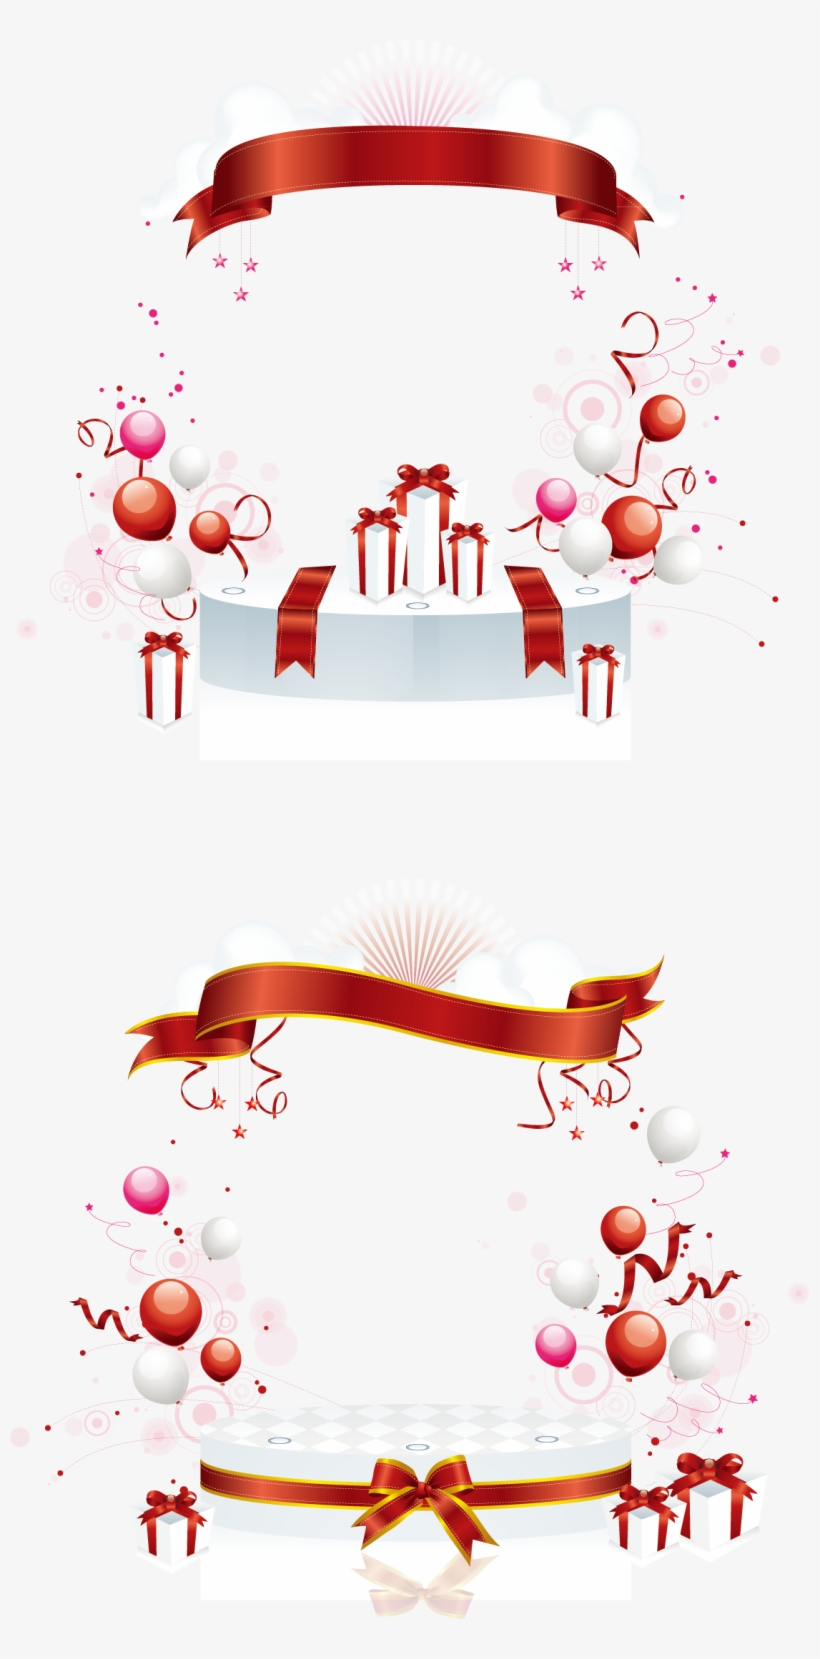 Gallery Of Free Wedding Clipart Unique Birthday Card - Wedding Card Clip Art Png, transparent png #5802514